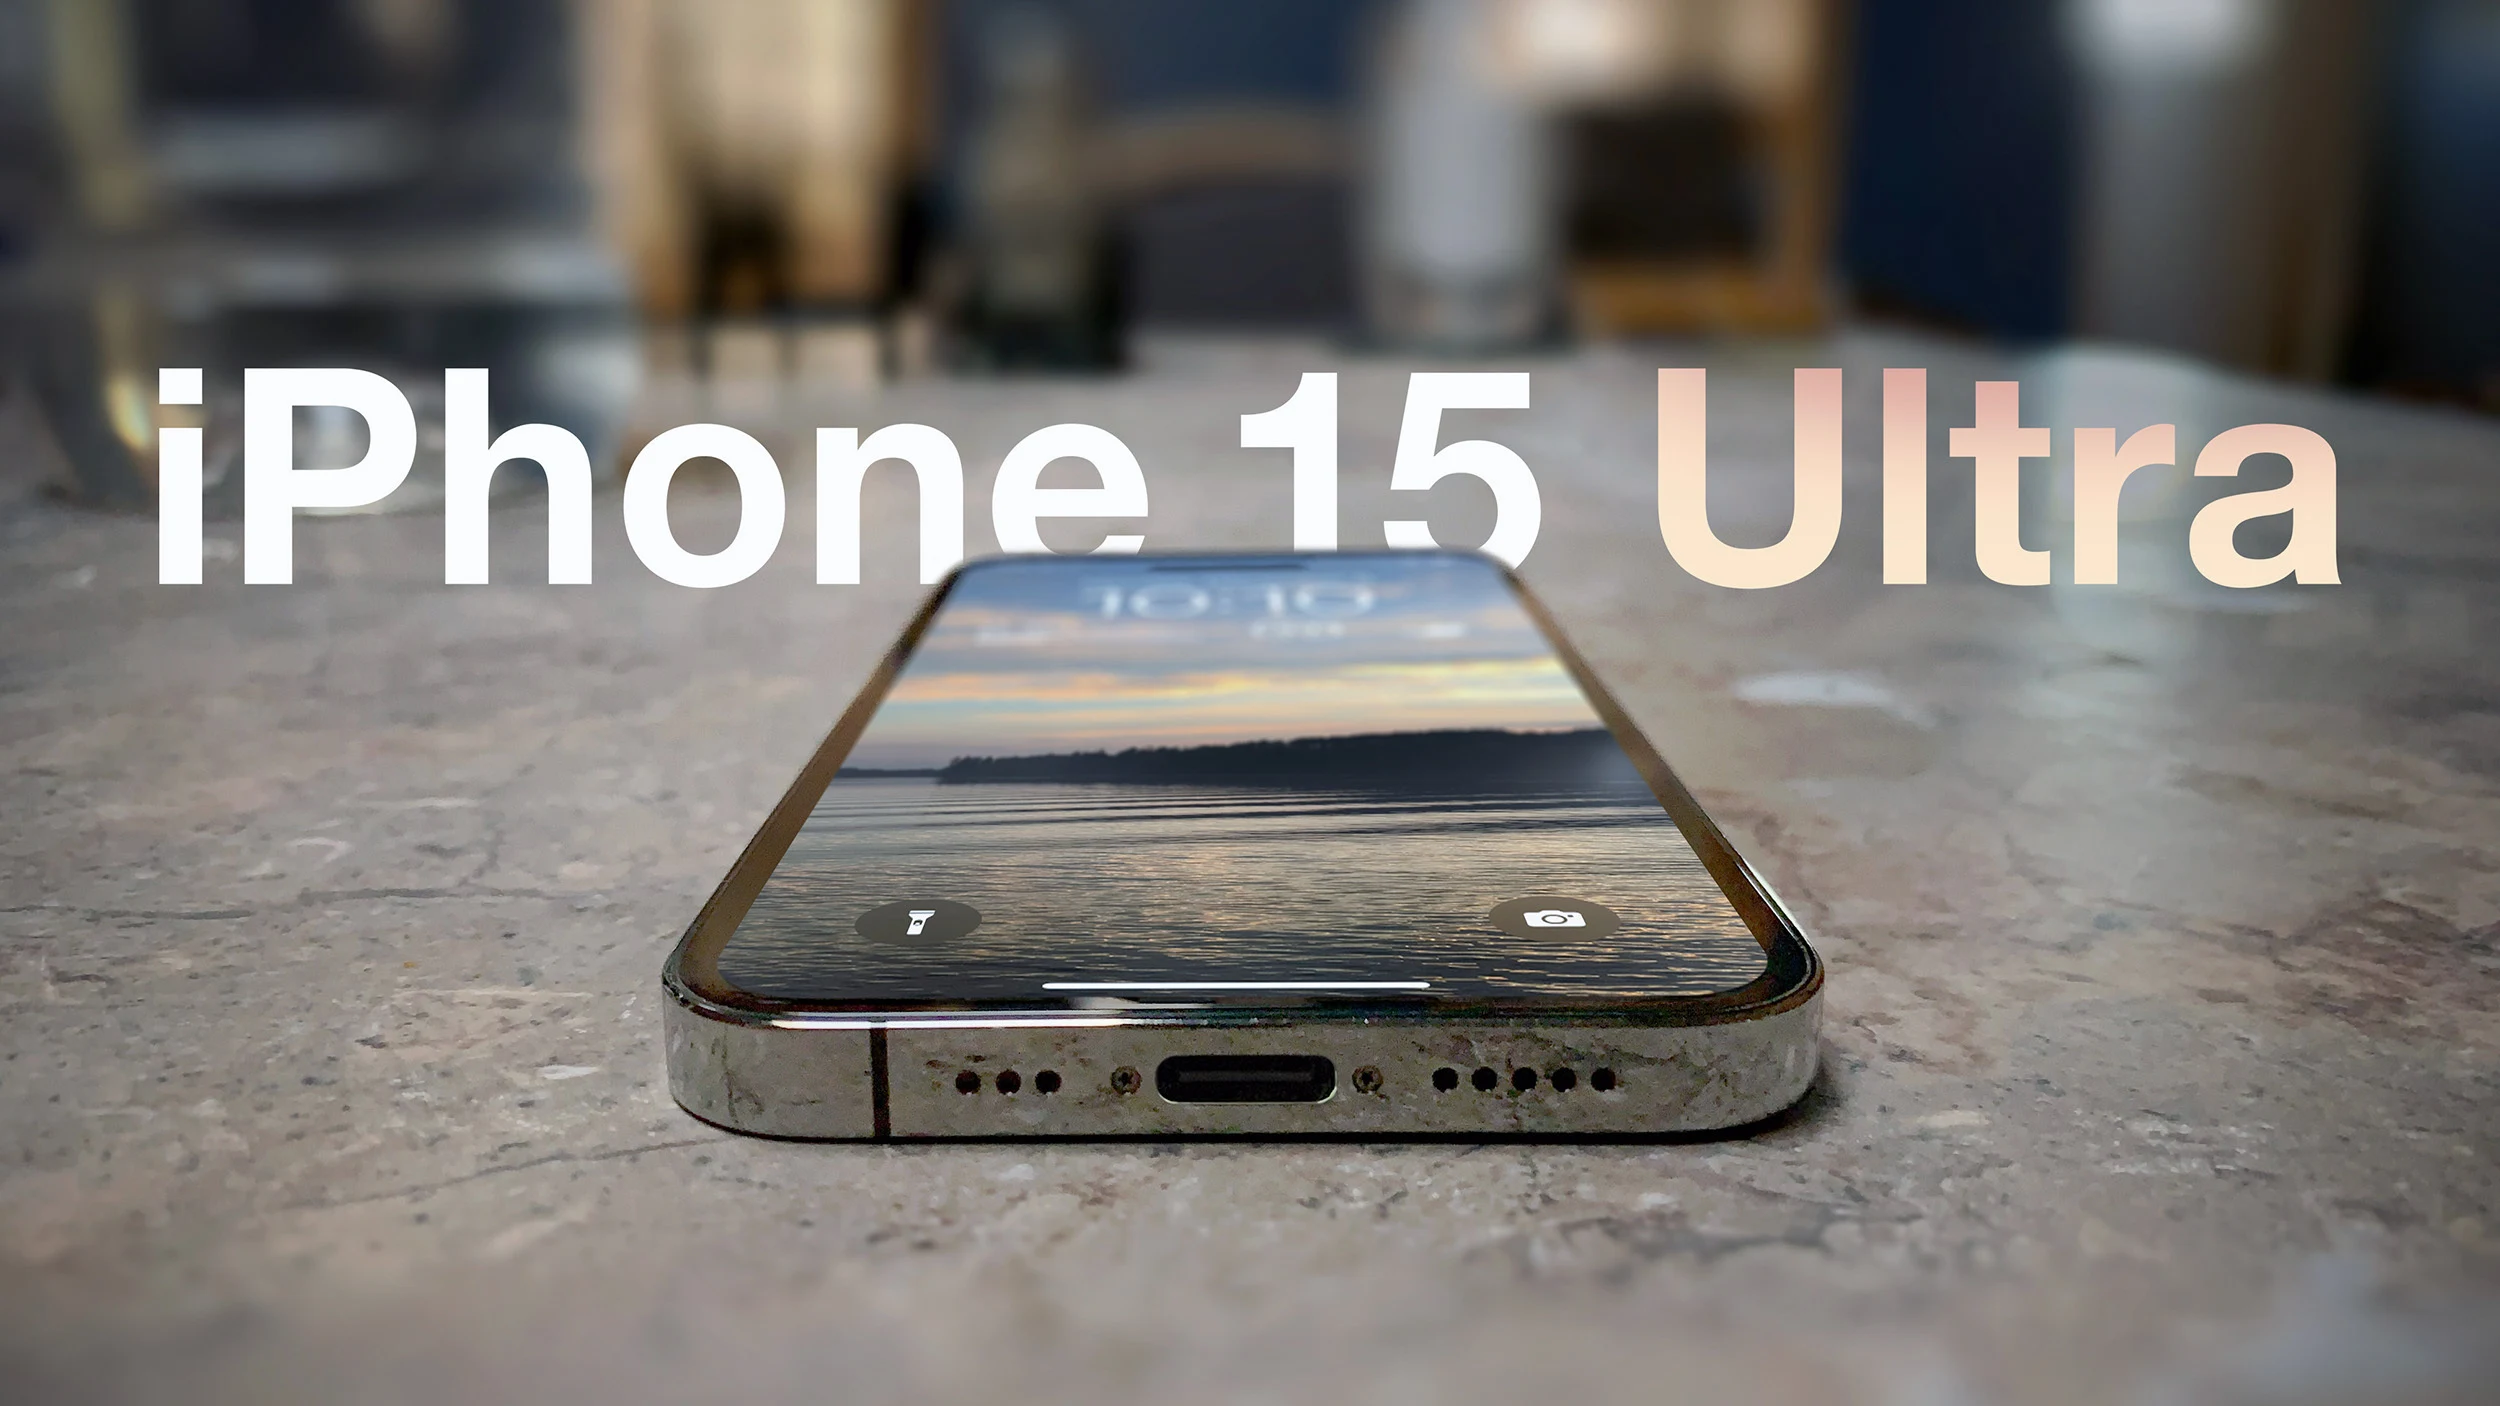 iPhone 15 Ultra Release Date, Rumors, and Price